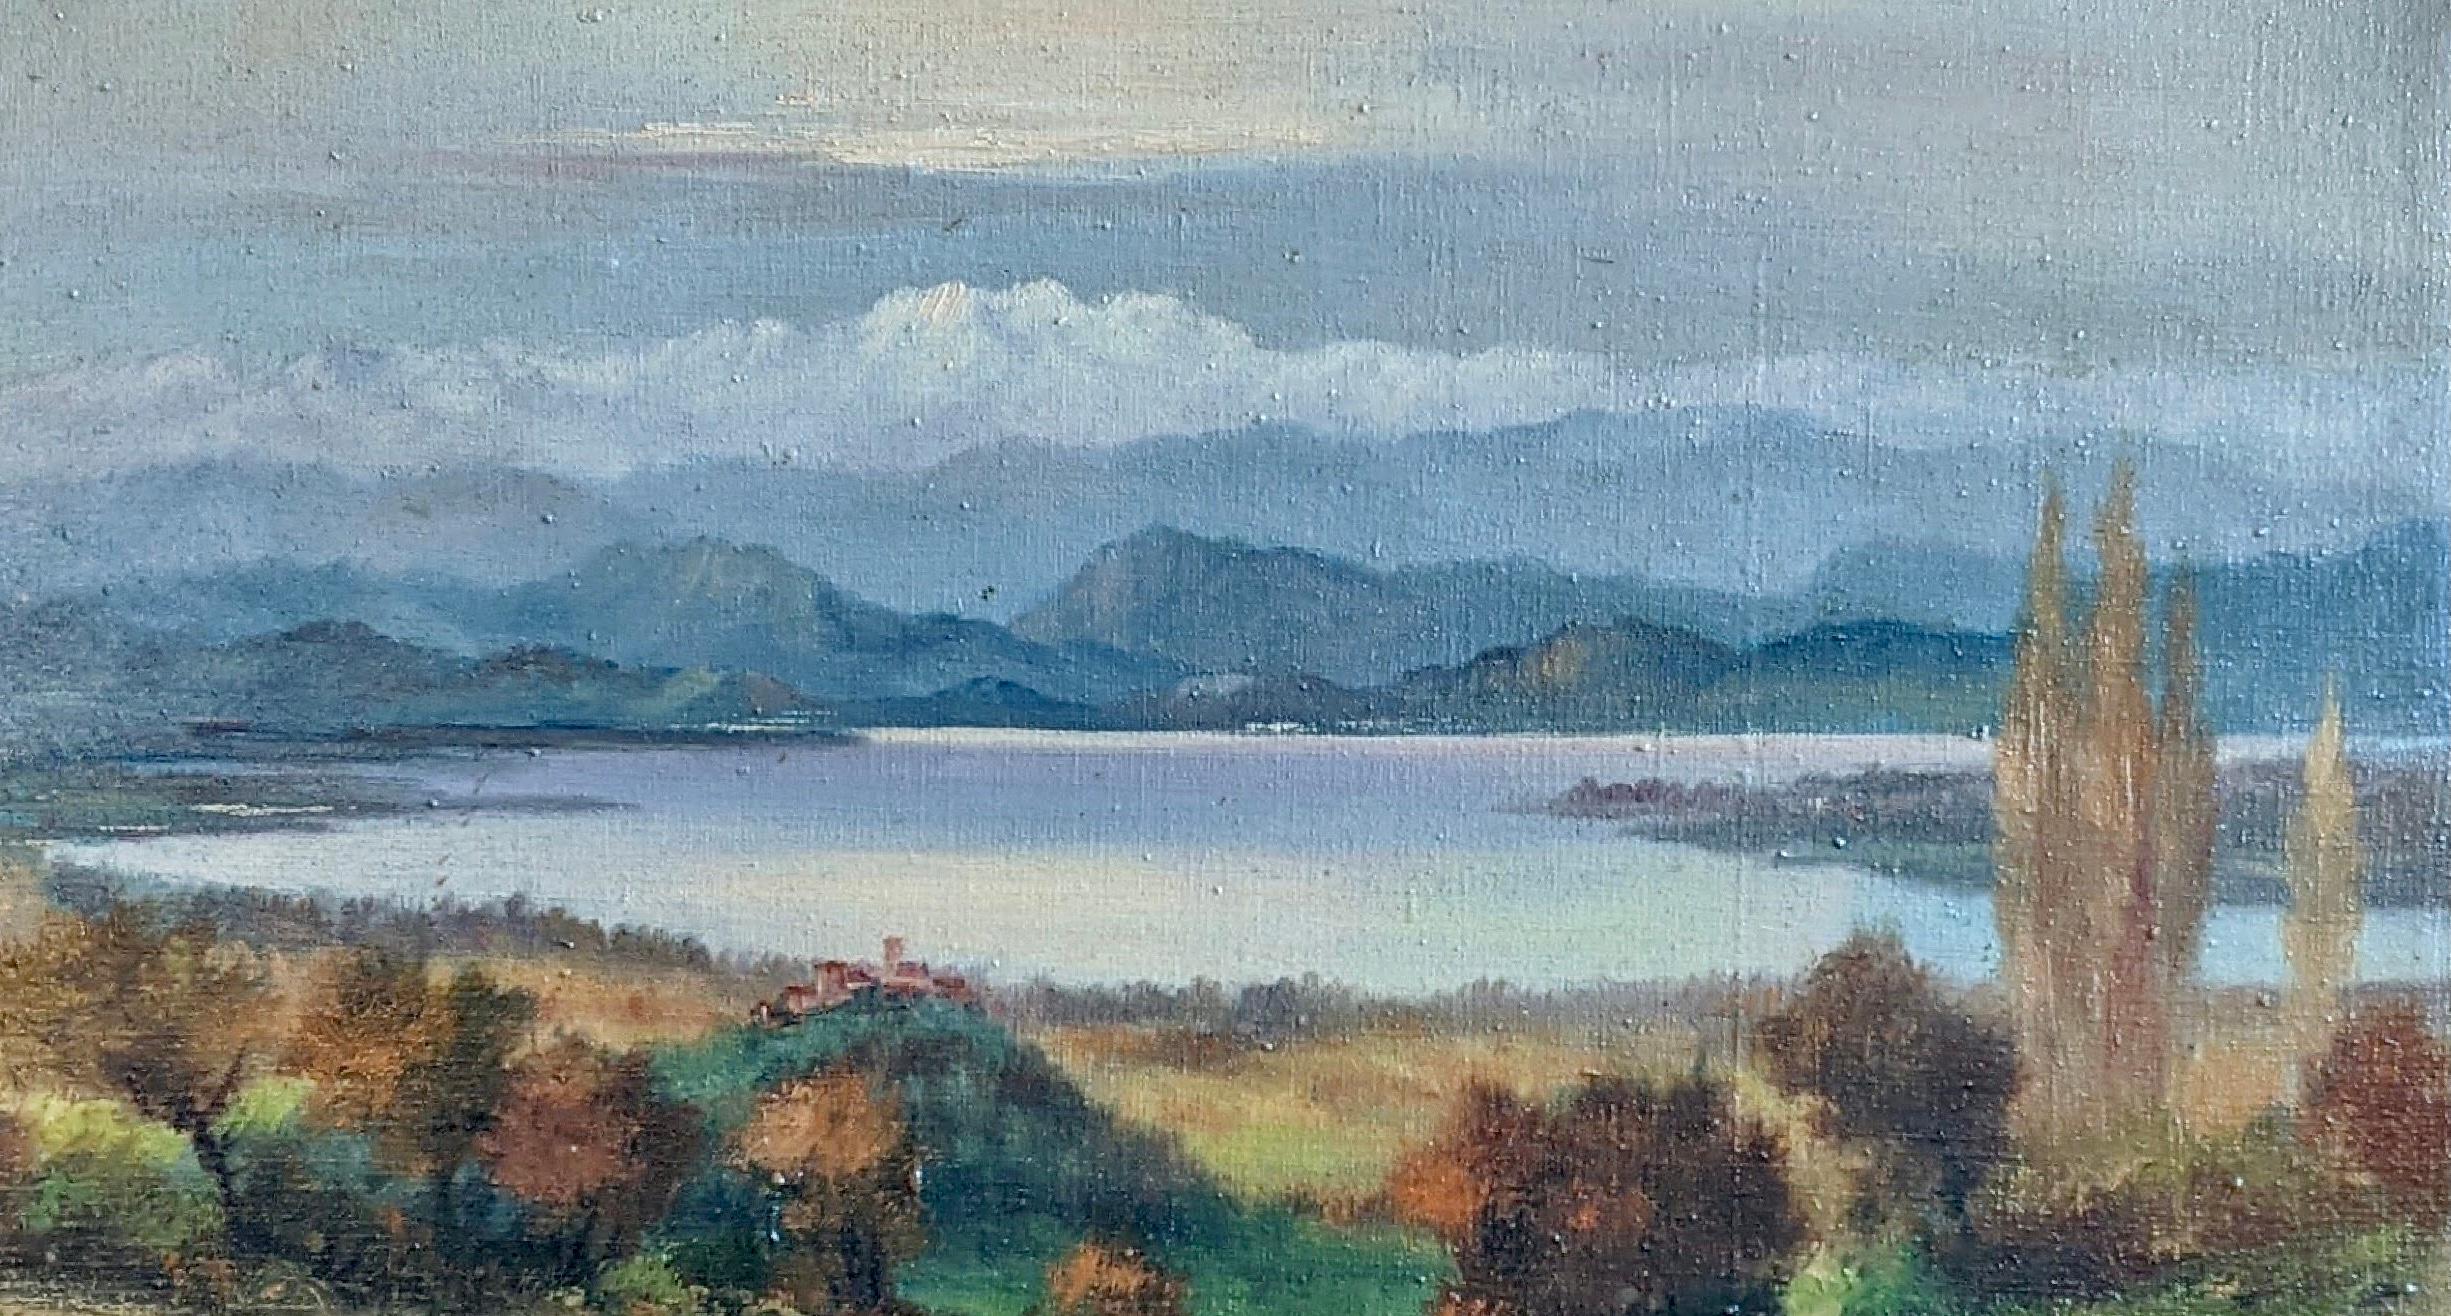 Painting representing a view of the Varese lake in Lombardy (Italy).

Guido Gnocchi (1893/1969), inextricably linked to his origins so much that he signed his works 